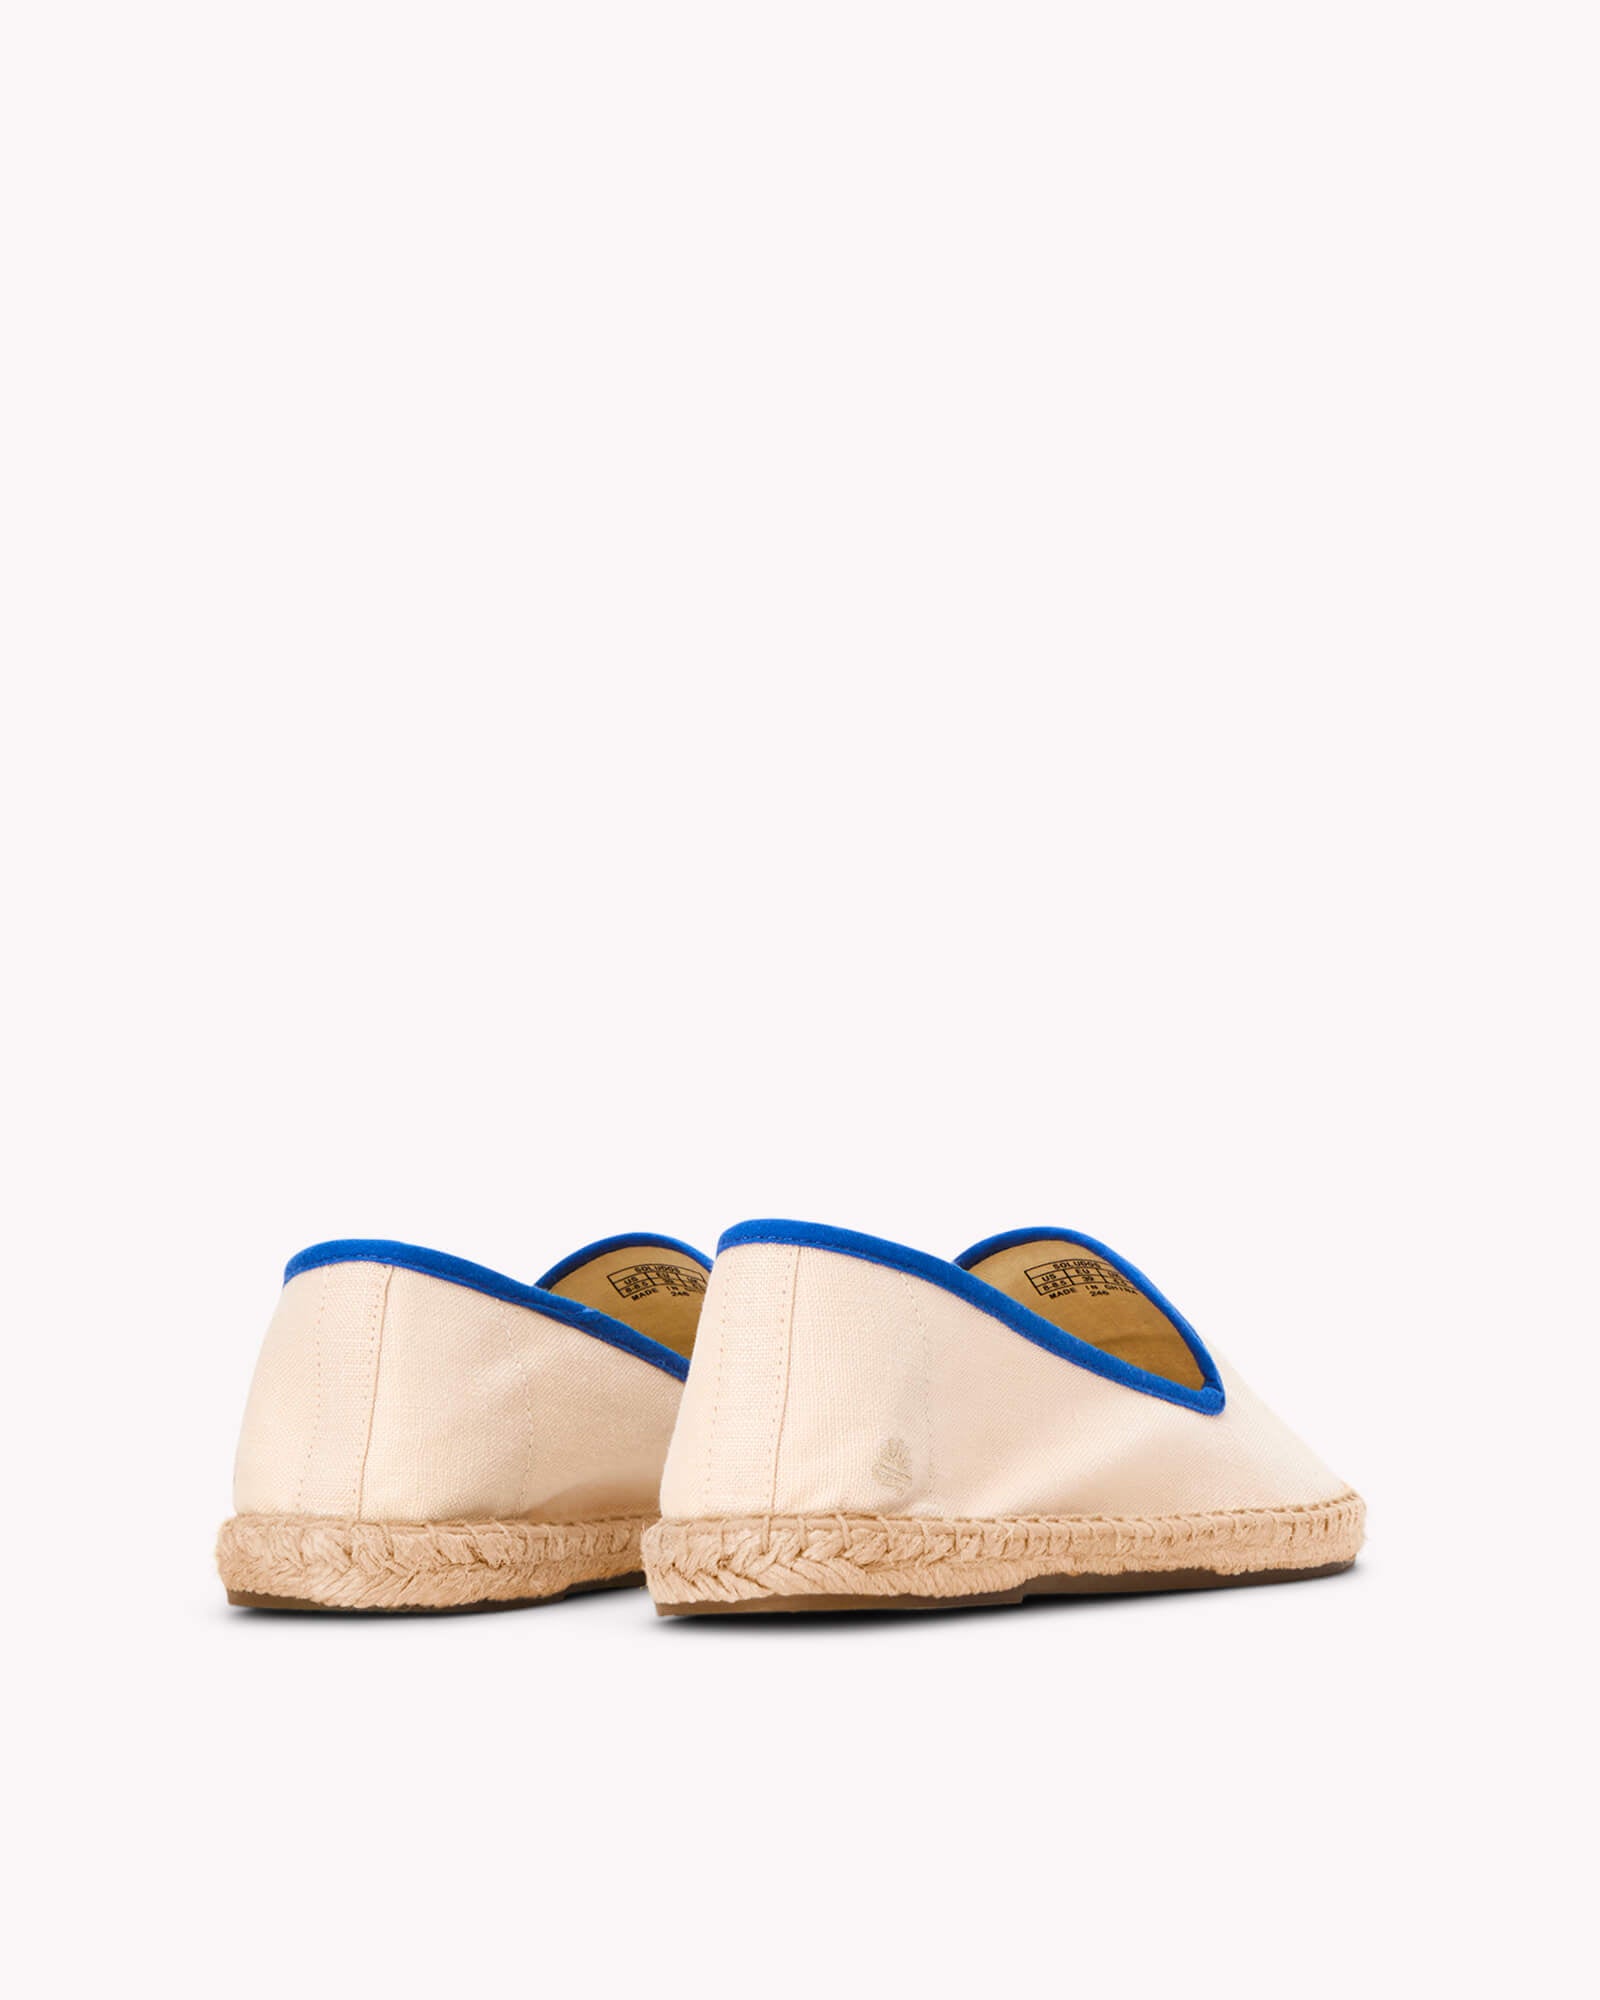 Women's ivory espadrille shoes with blue piping on gray background